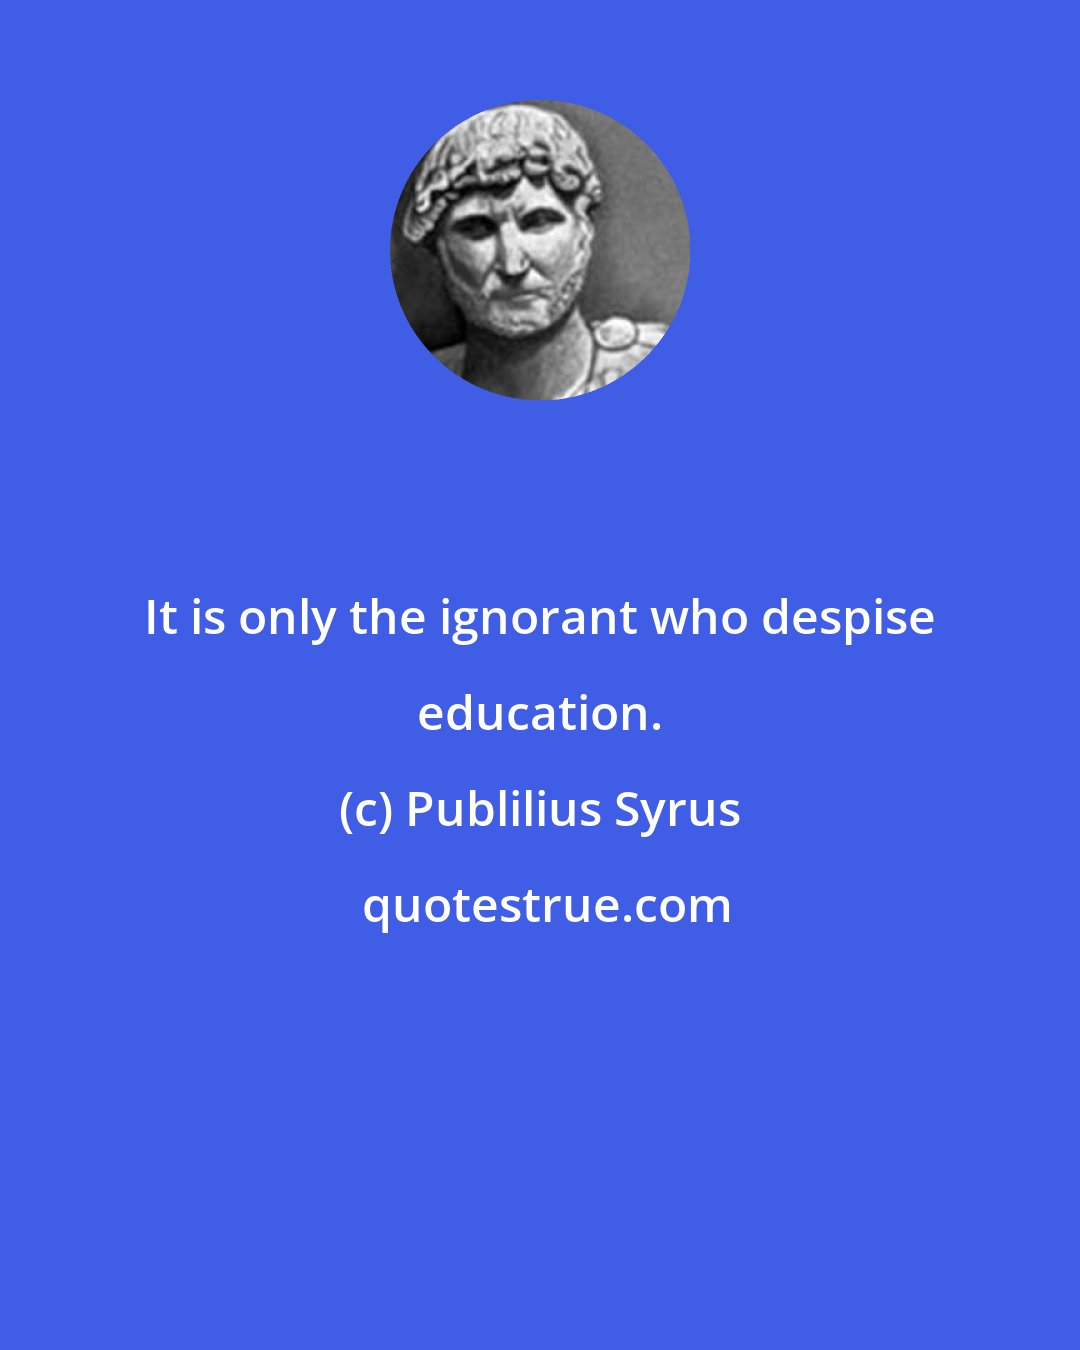 Publilius Syrus: It is only the ignorant who despise education.